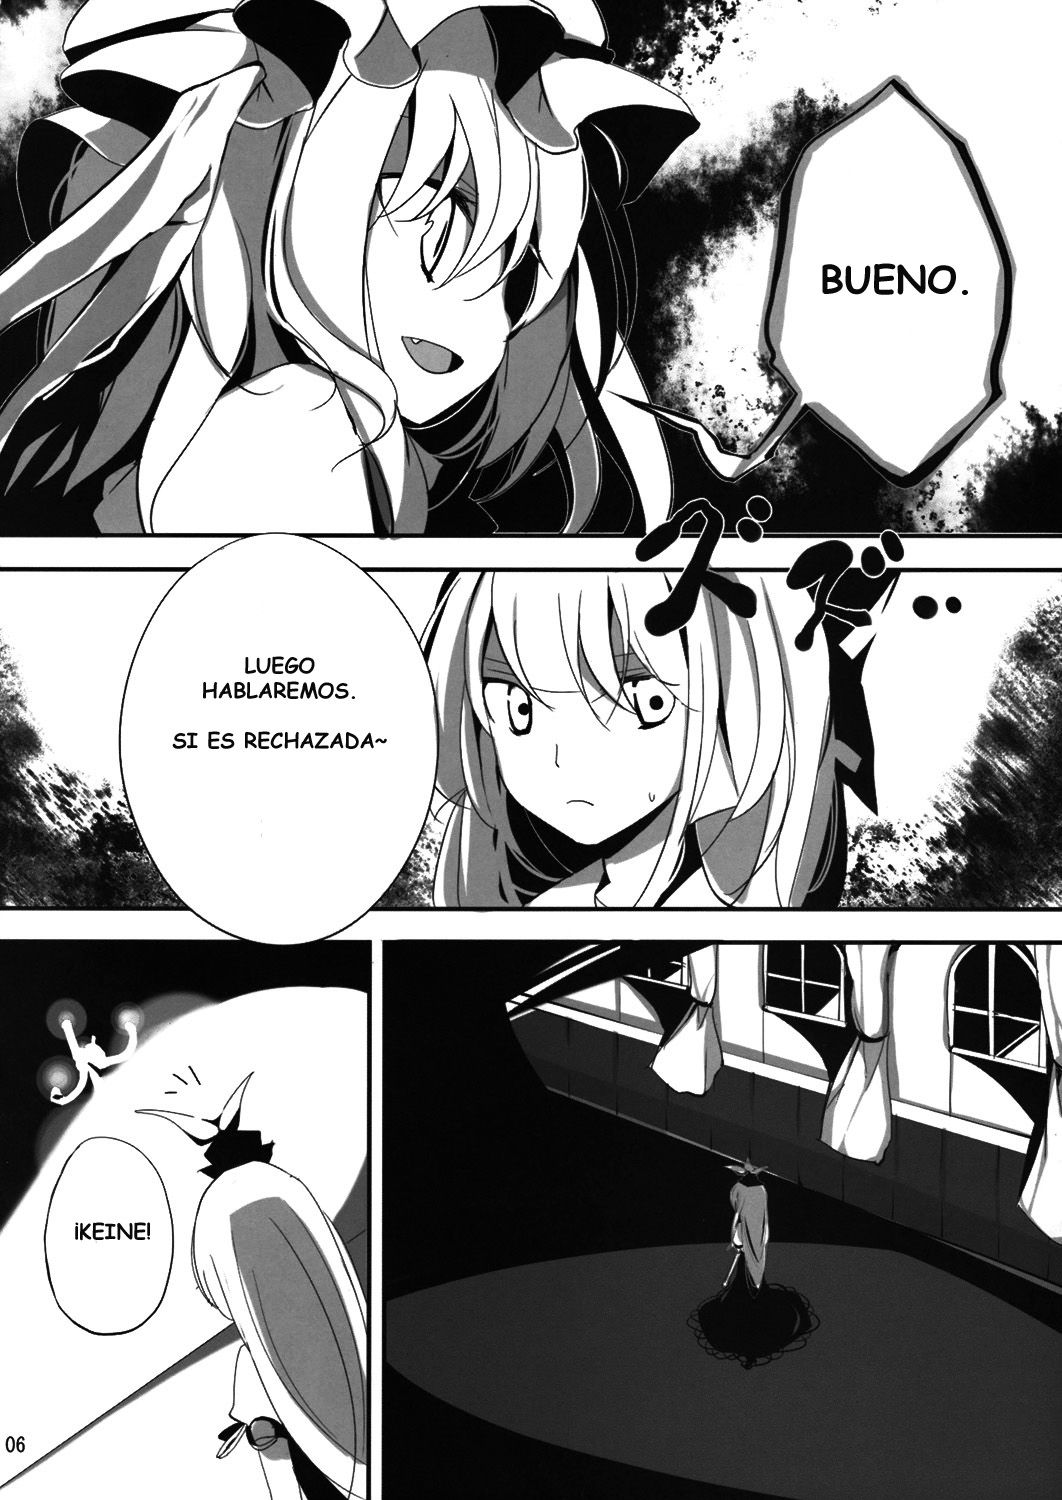 (C76) [Usotsukiya, Oppore-Coppore (BeLL, Oouso)] Flandre Student (Touhou Project) [Spanish] 5